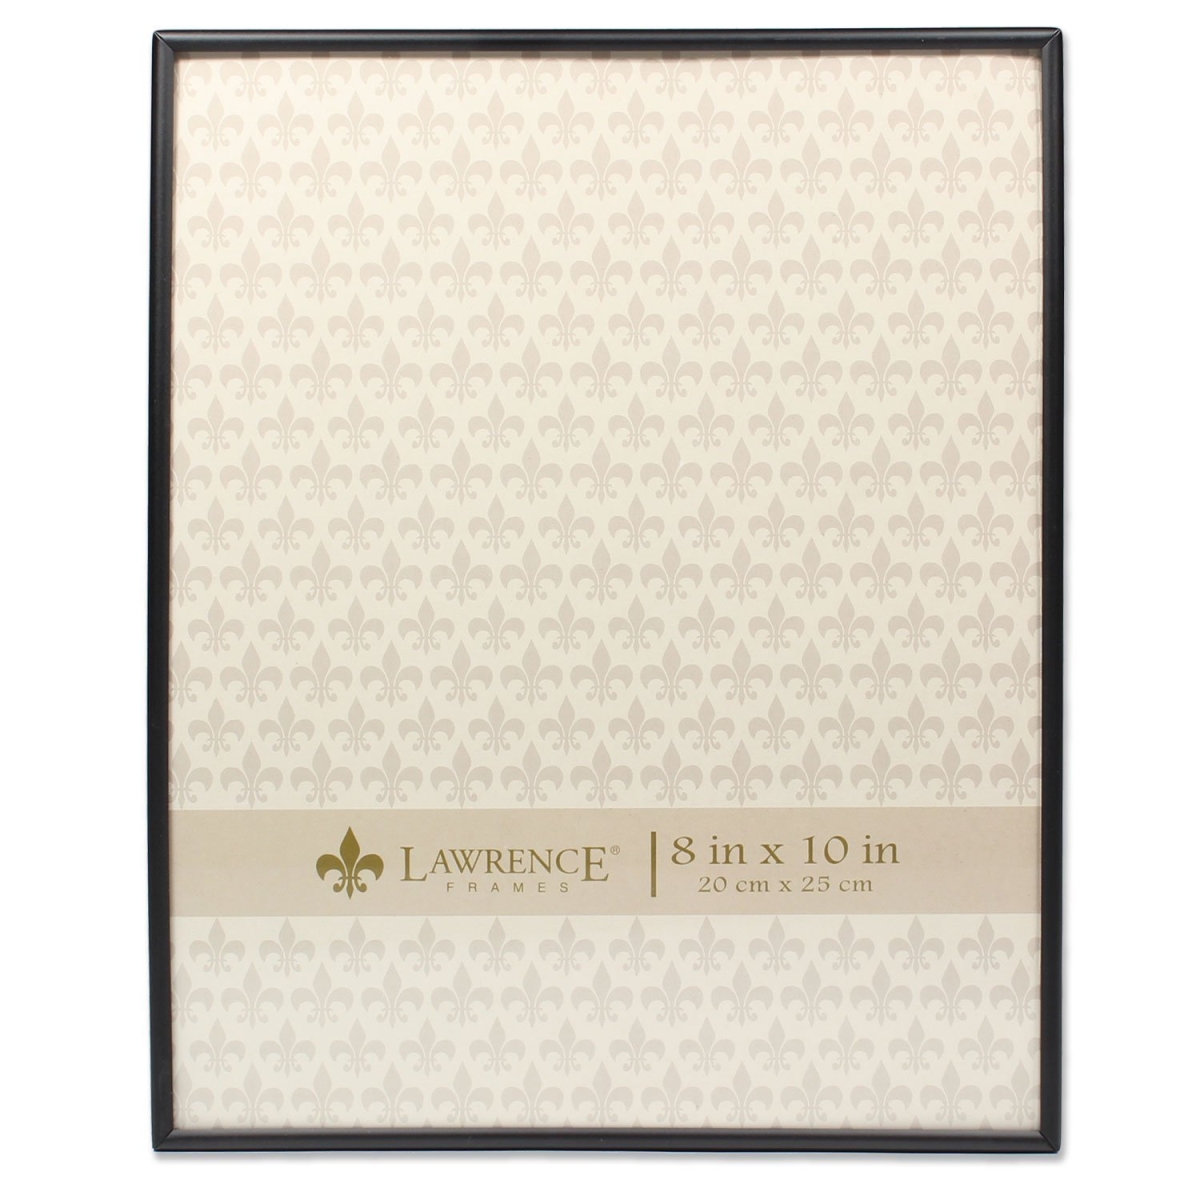 Picture of LawrenceFrames 660080 8 x 10 in. Simply Picture Frame, Black